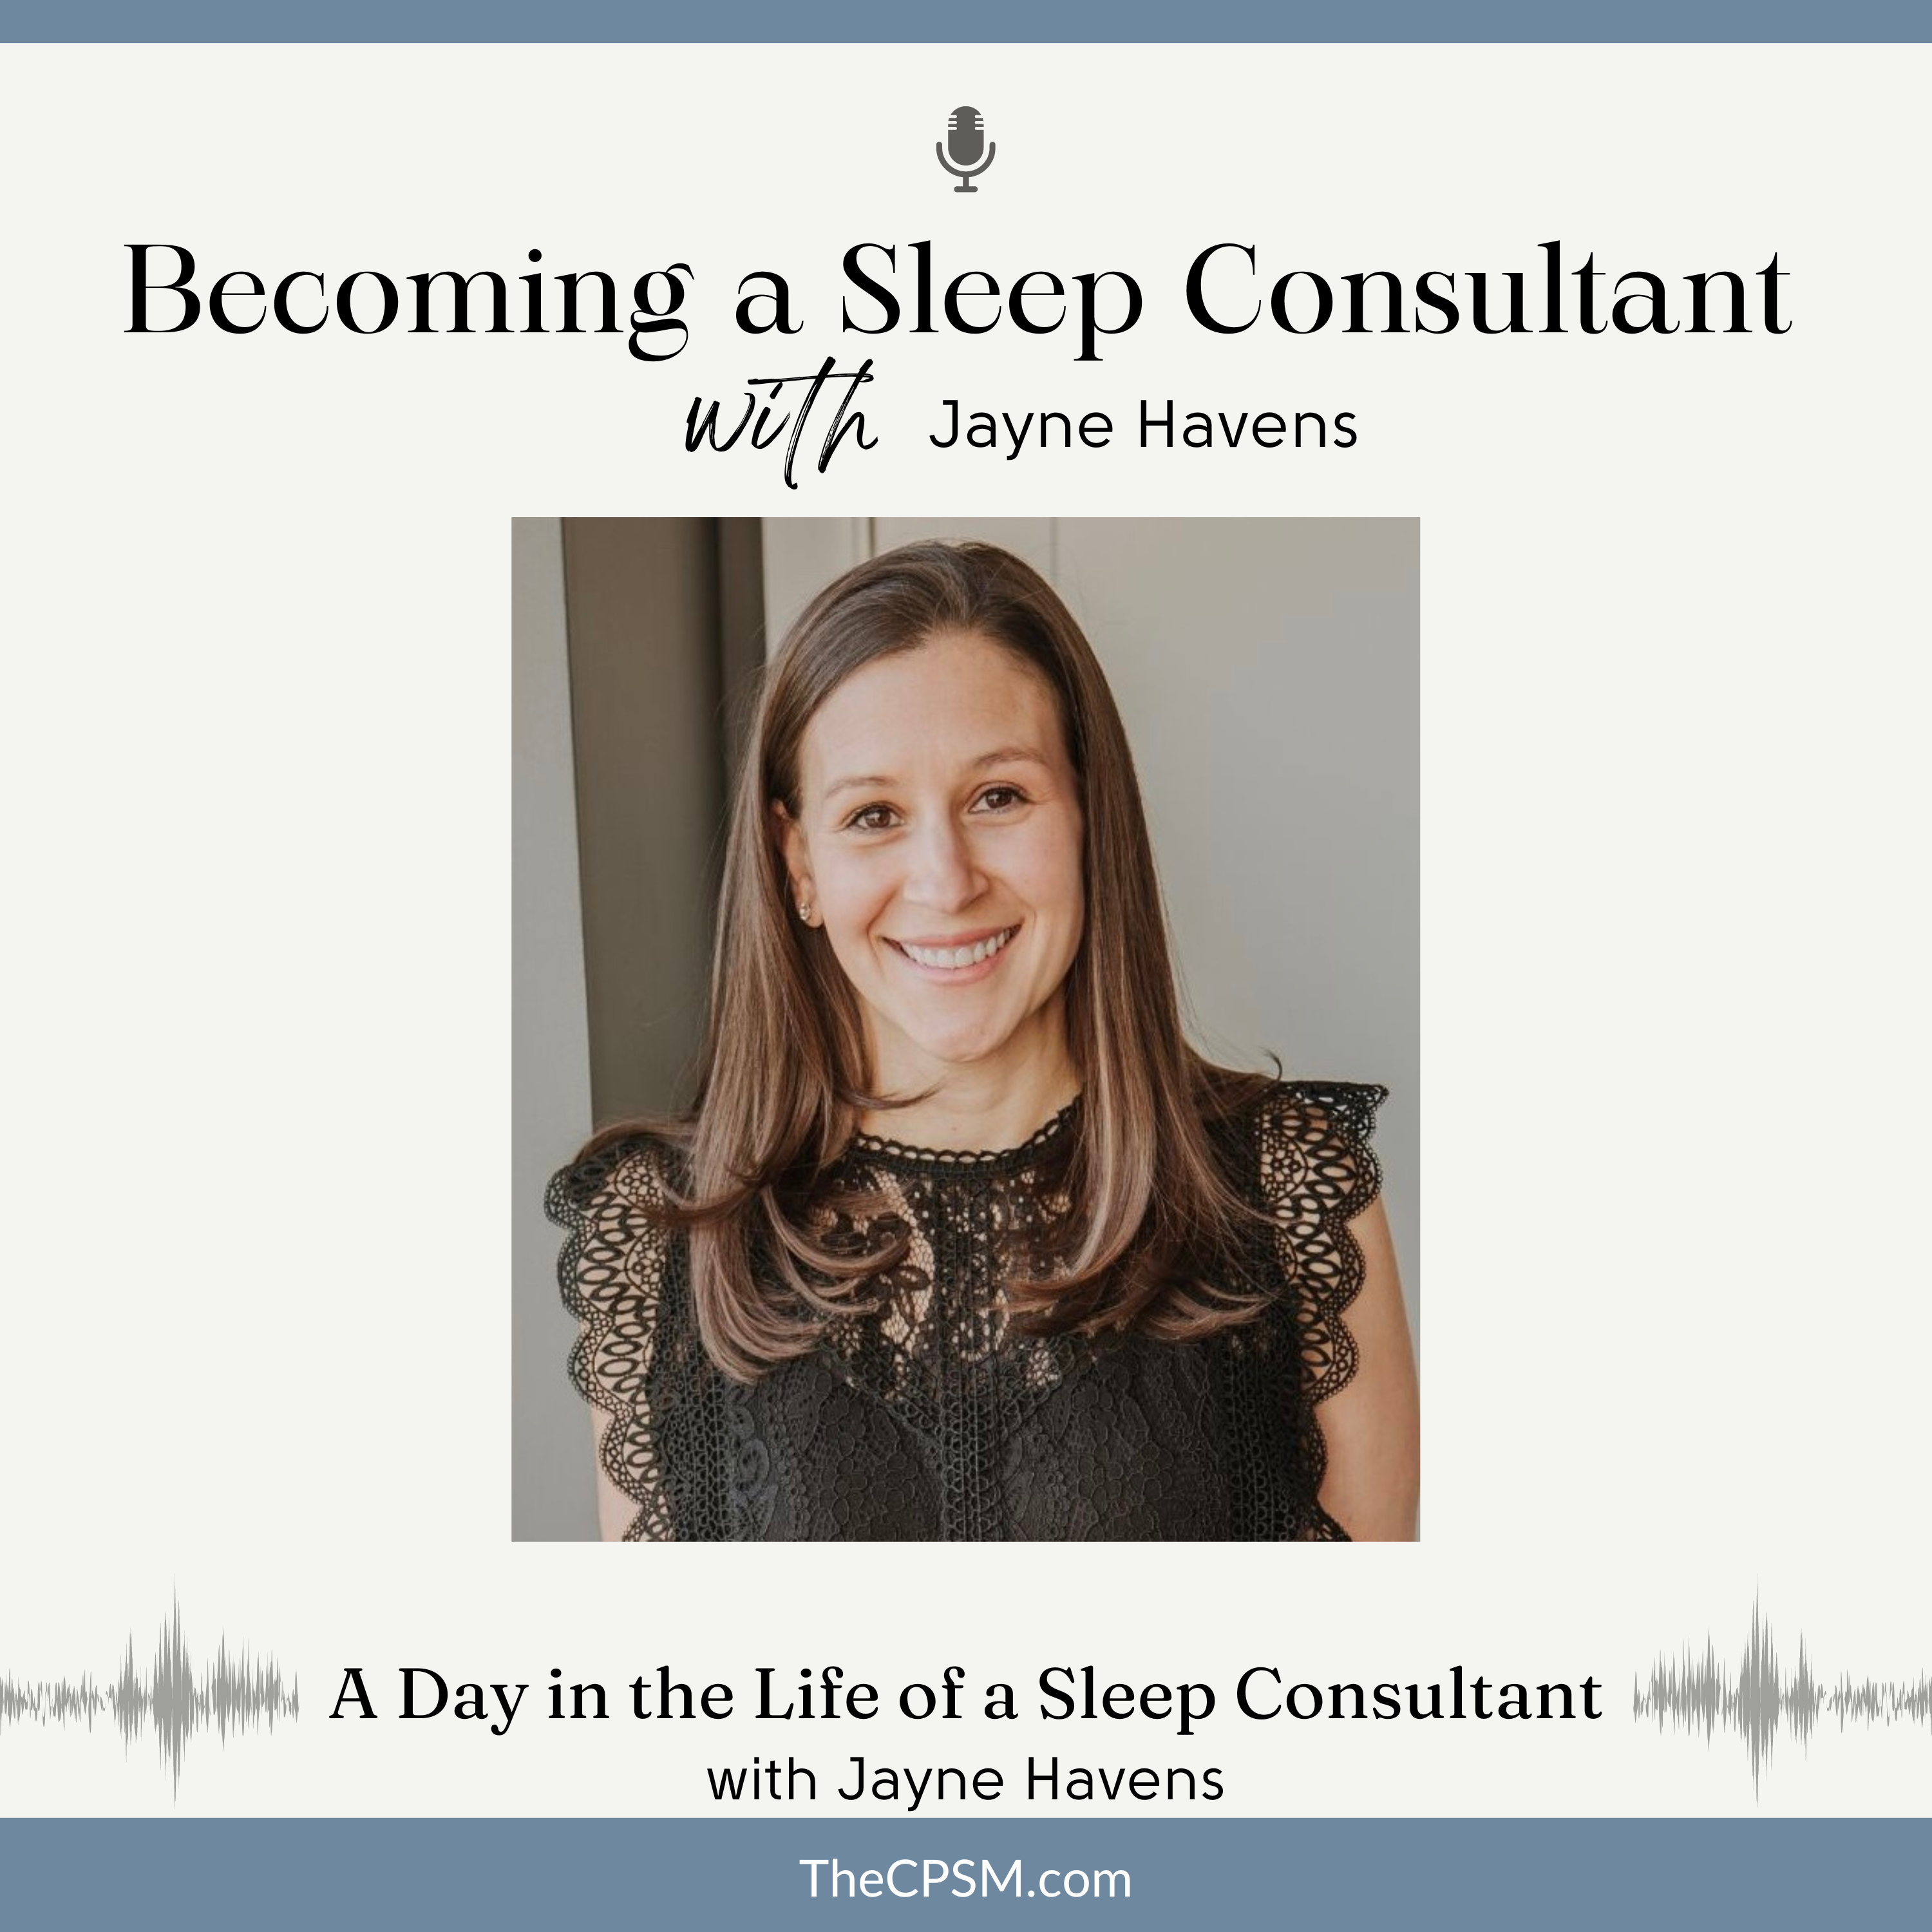 A Day in the Life of a Sleep Consultant with Jayne Havens